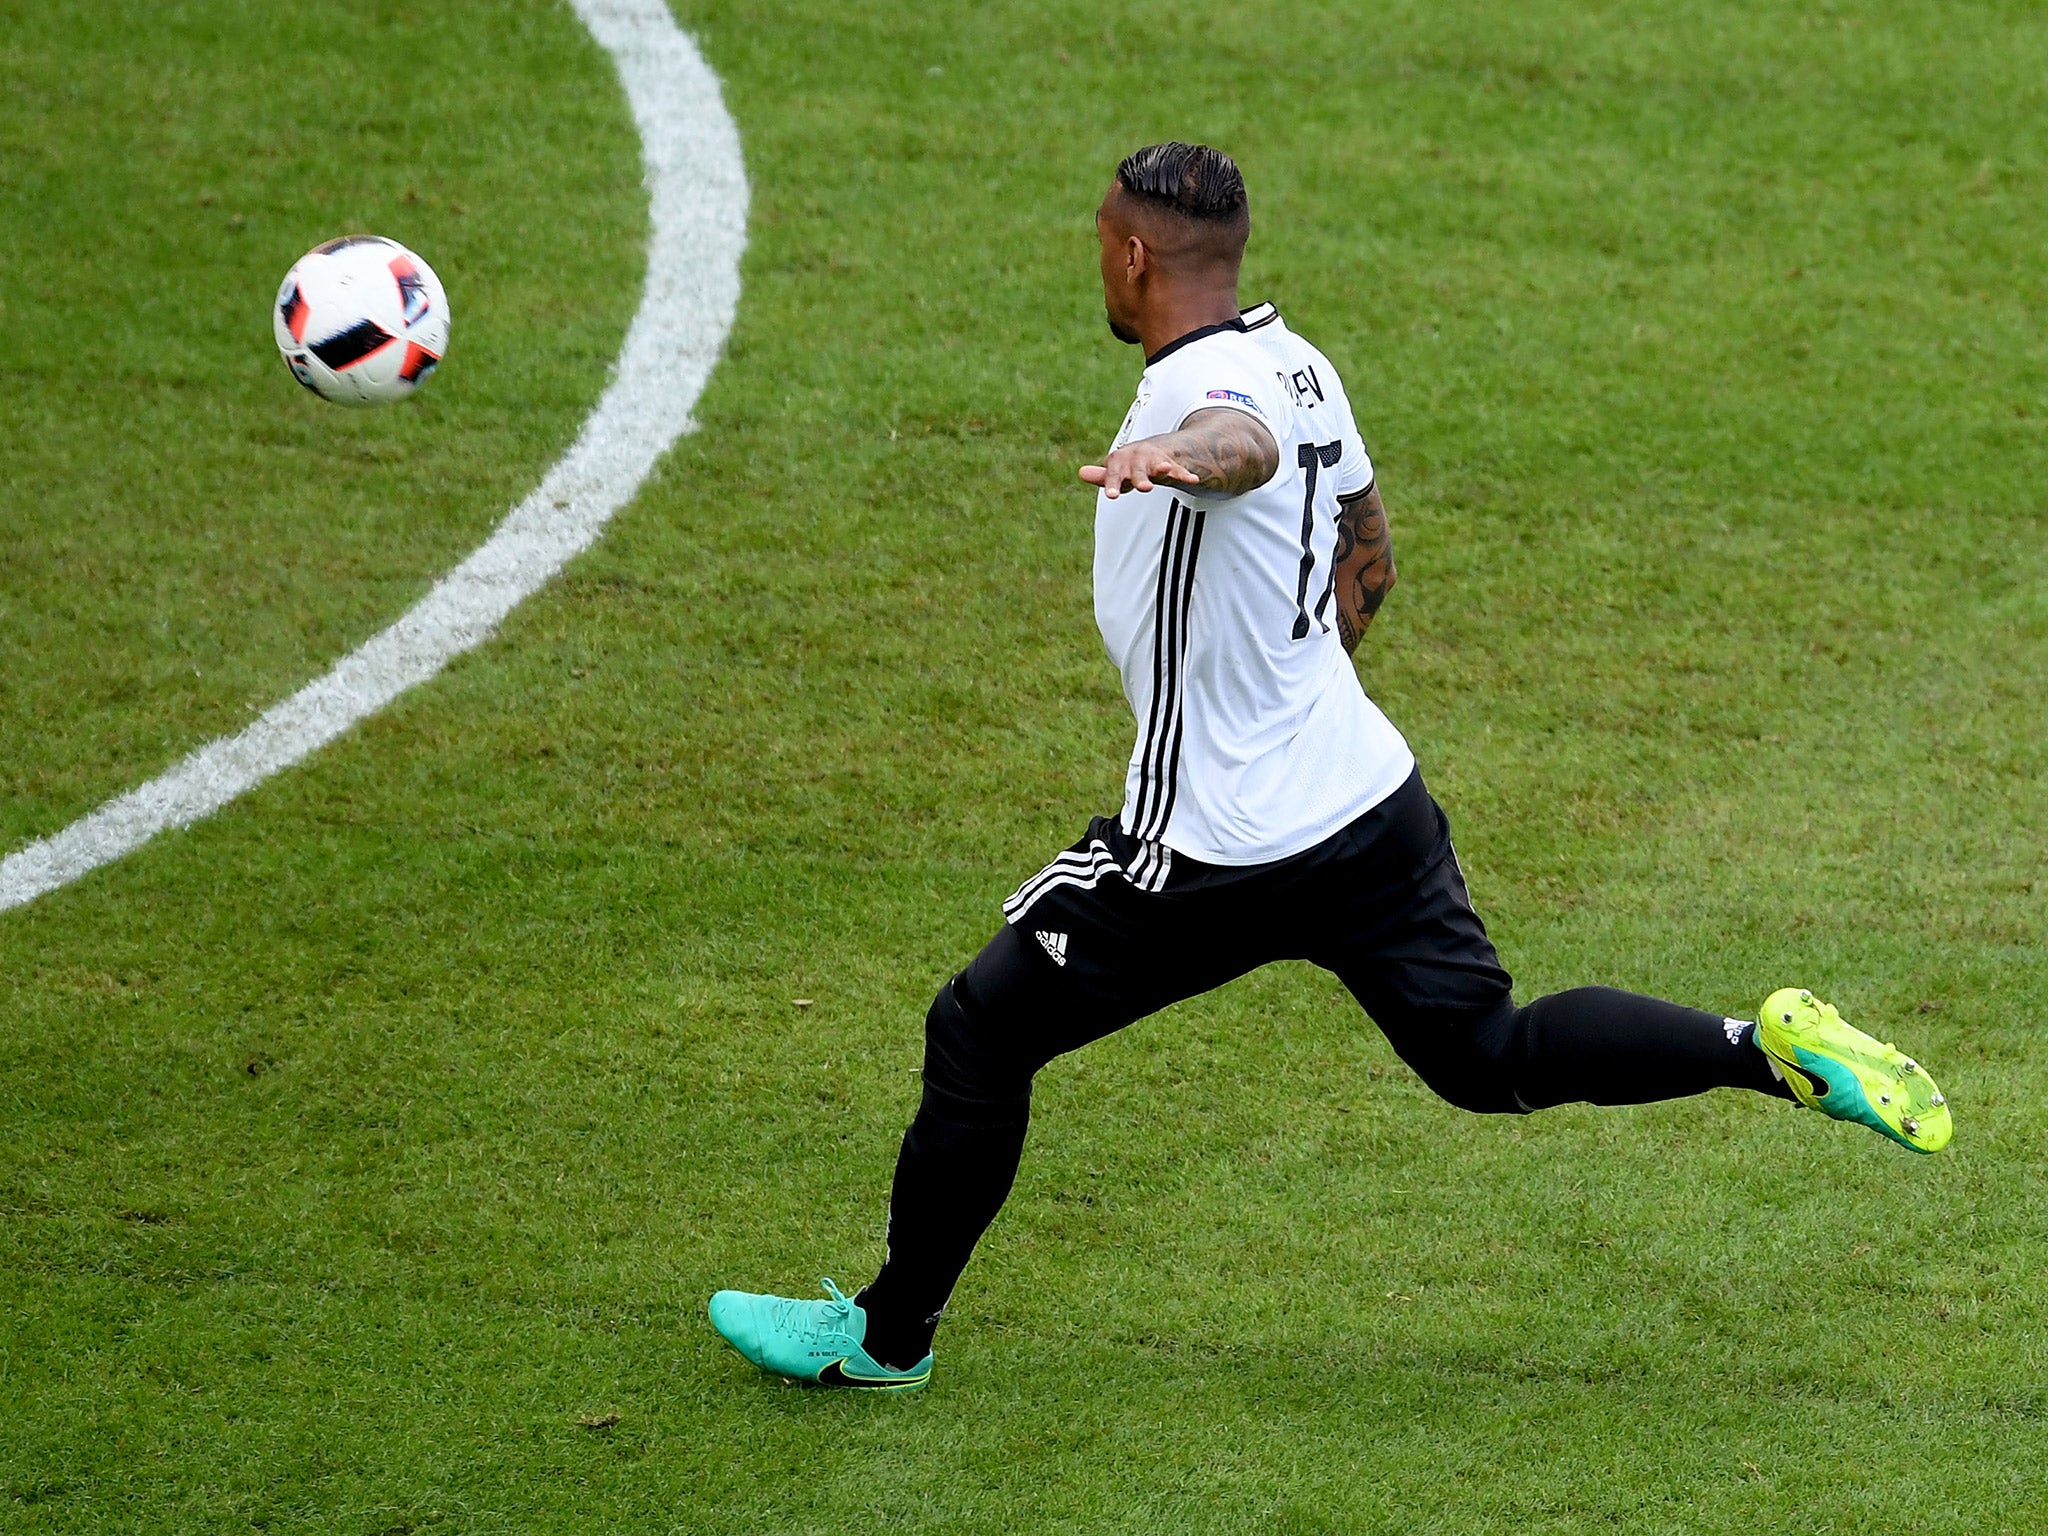 Jerome Boateng hits a volley that gives Germany the lead against Slovakia